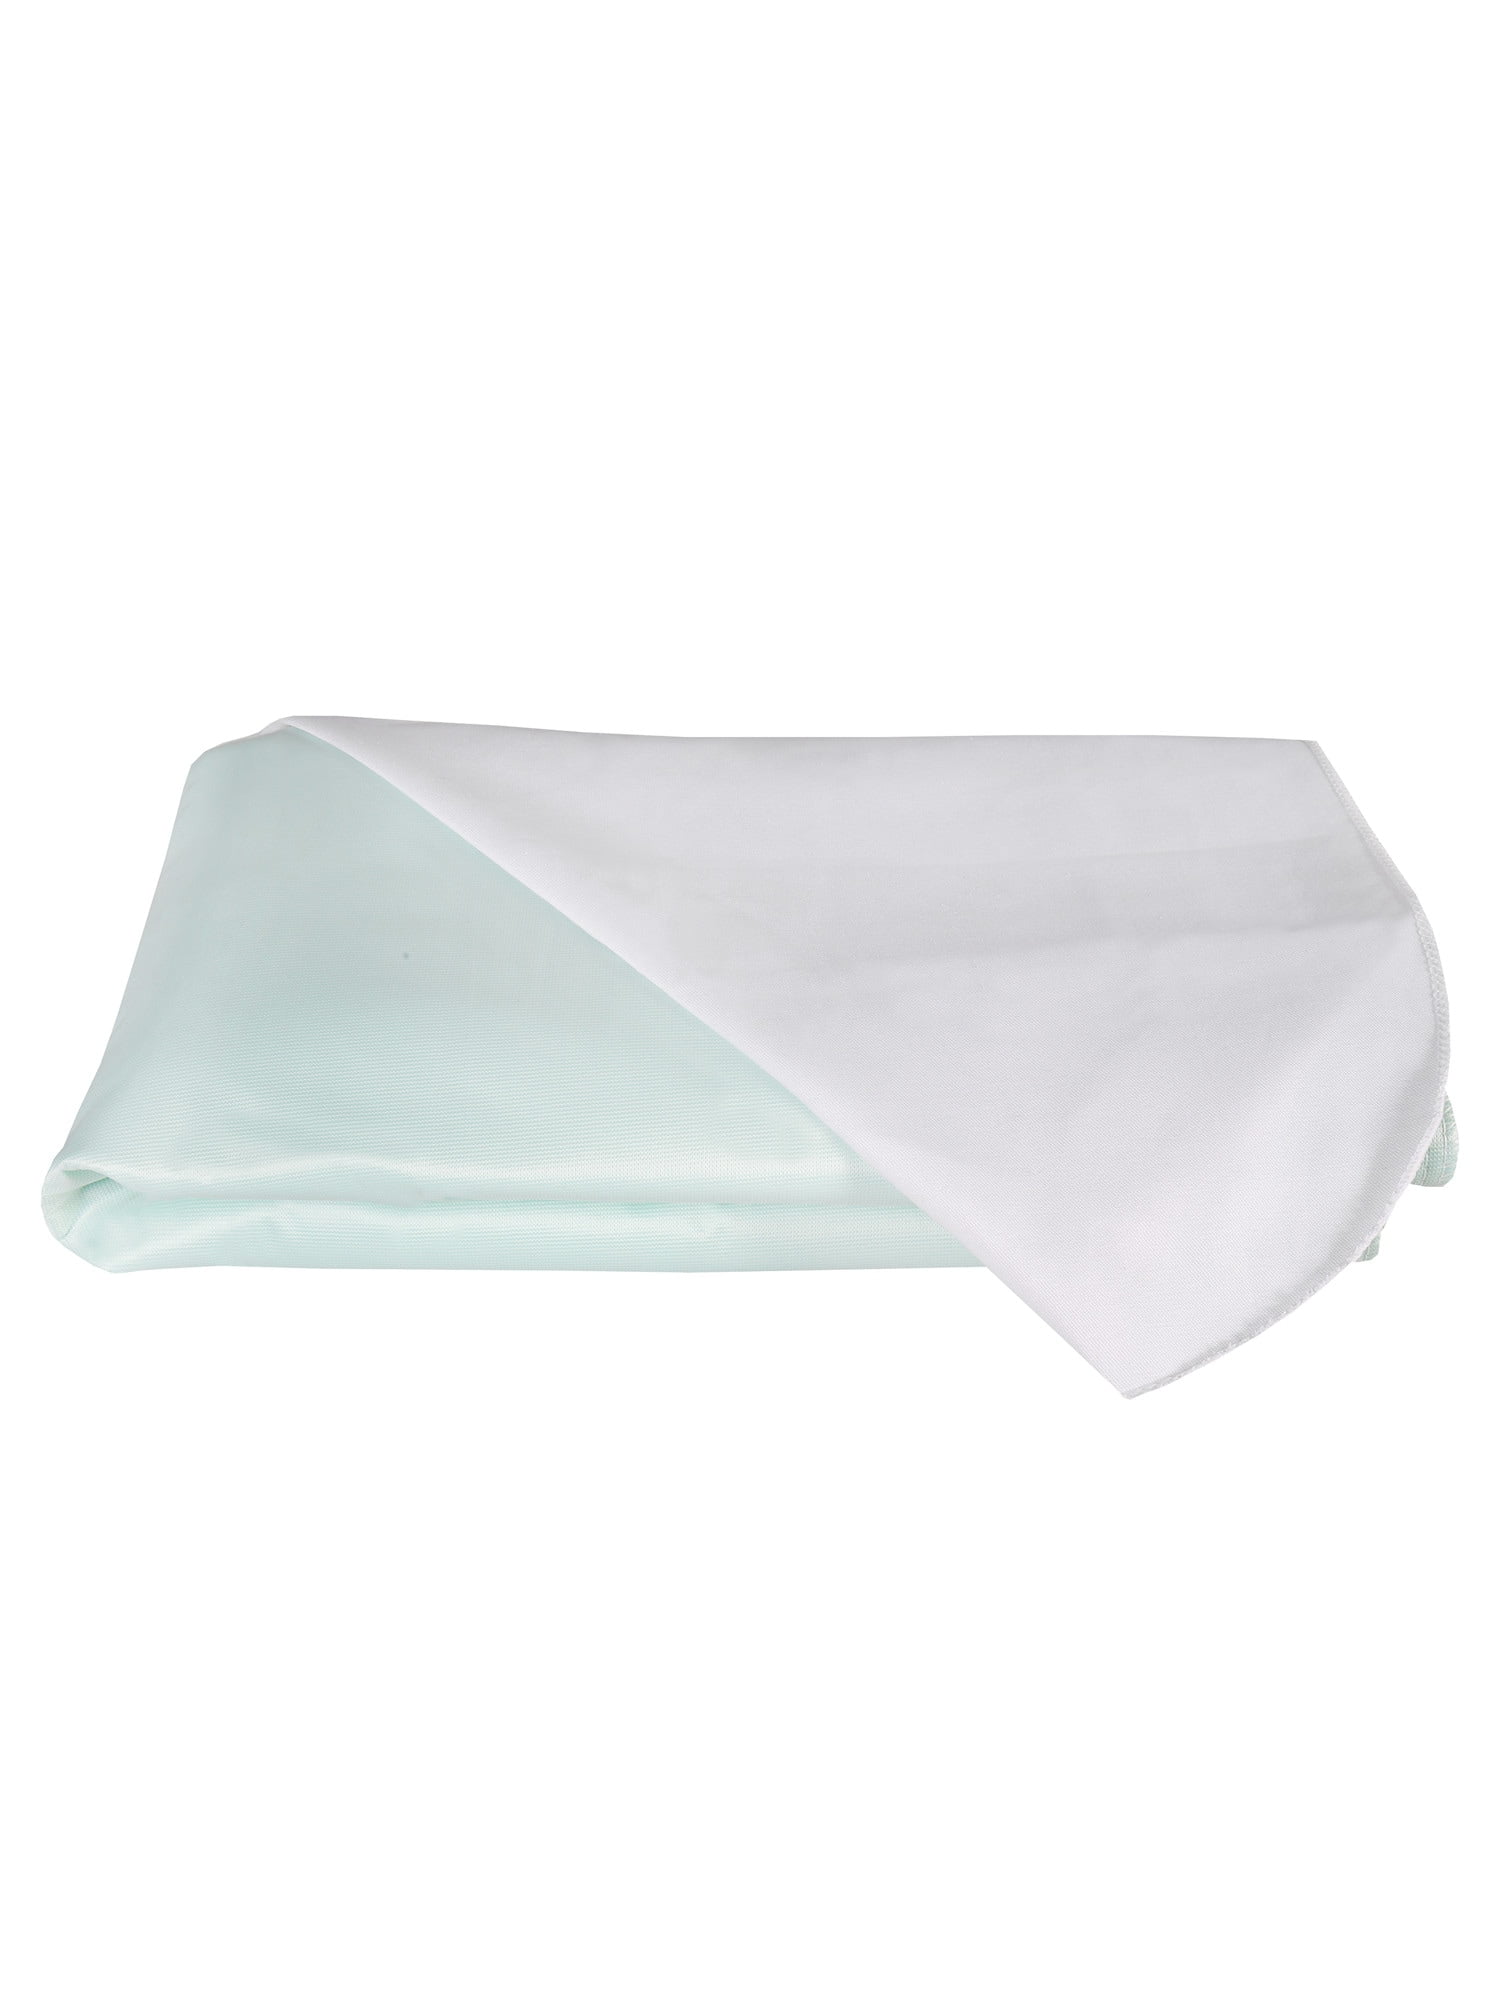 RMS Ultra Soft 4-Layer Washable and Reusable Incontinence Bed Pads, 34X36  with Four Handles